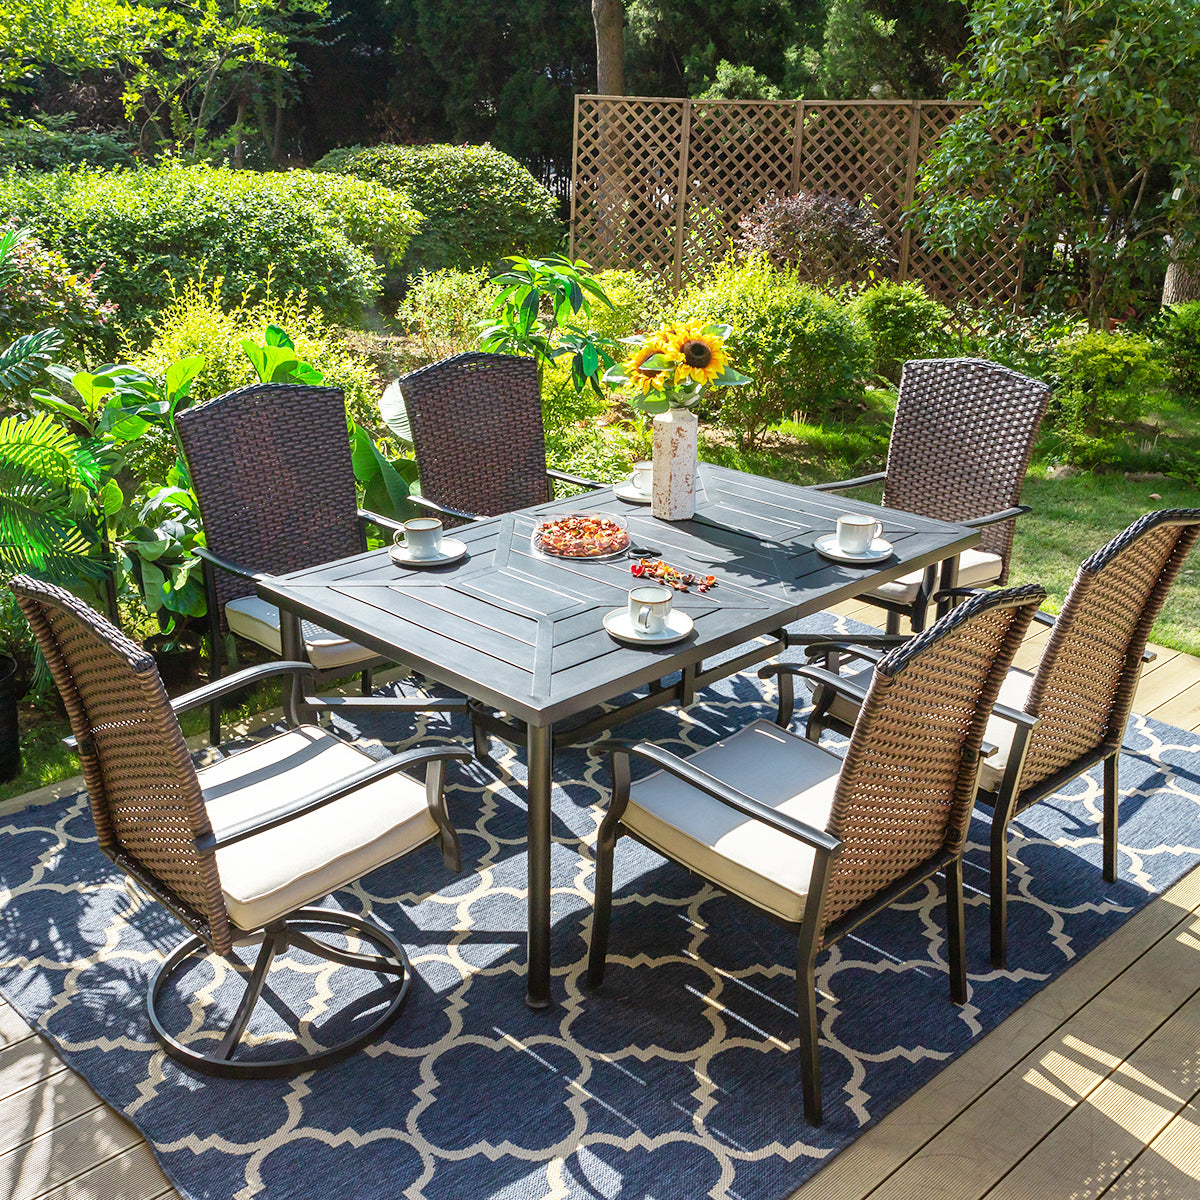 Sophia & William 7-Piece Patio Dining Set Fan-shape Rattan Chairs & Geometrically Stamped Rectangle Table